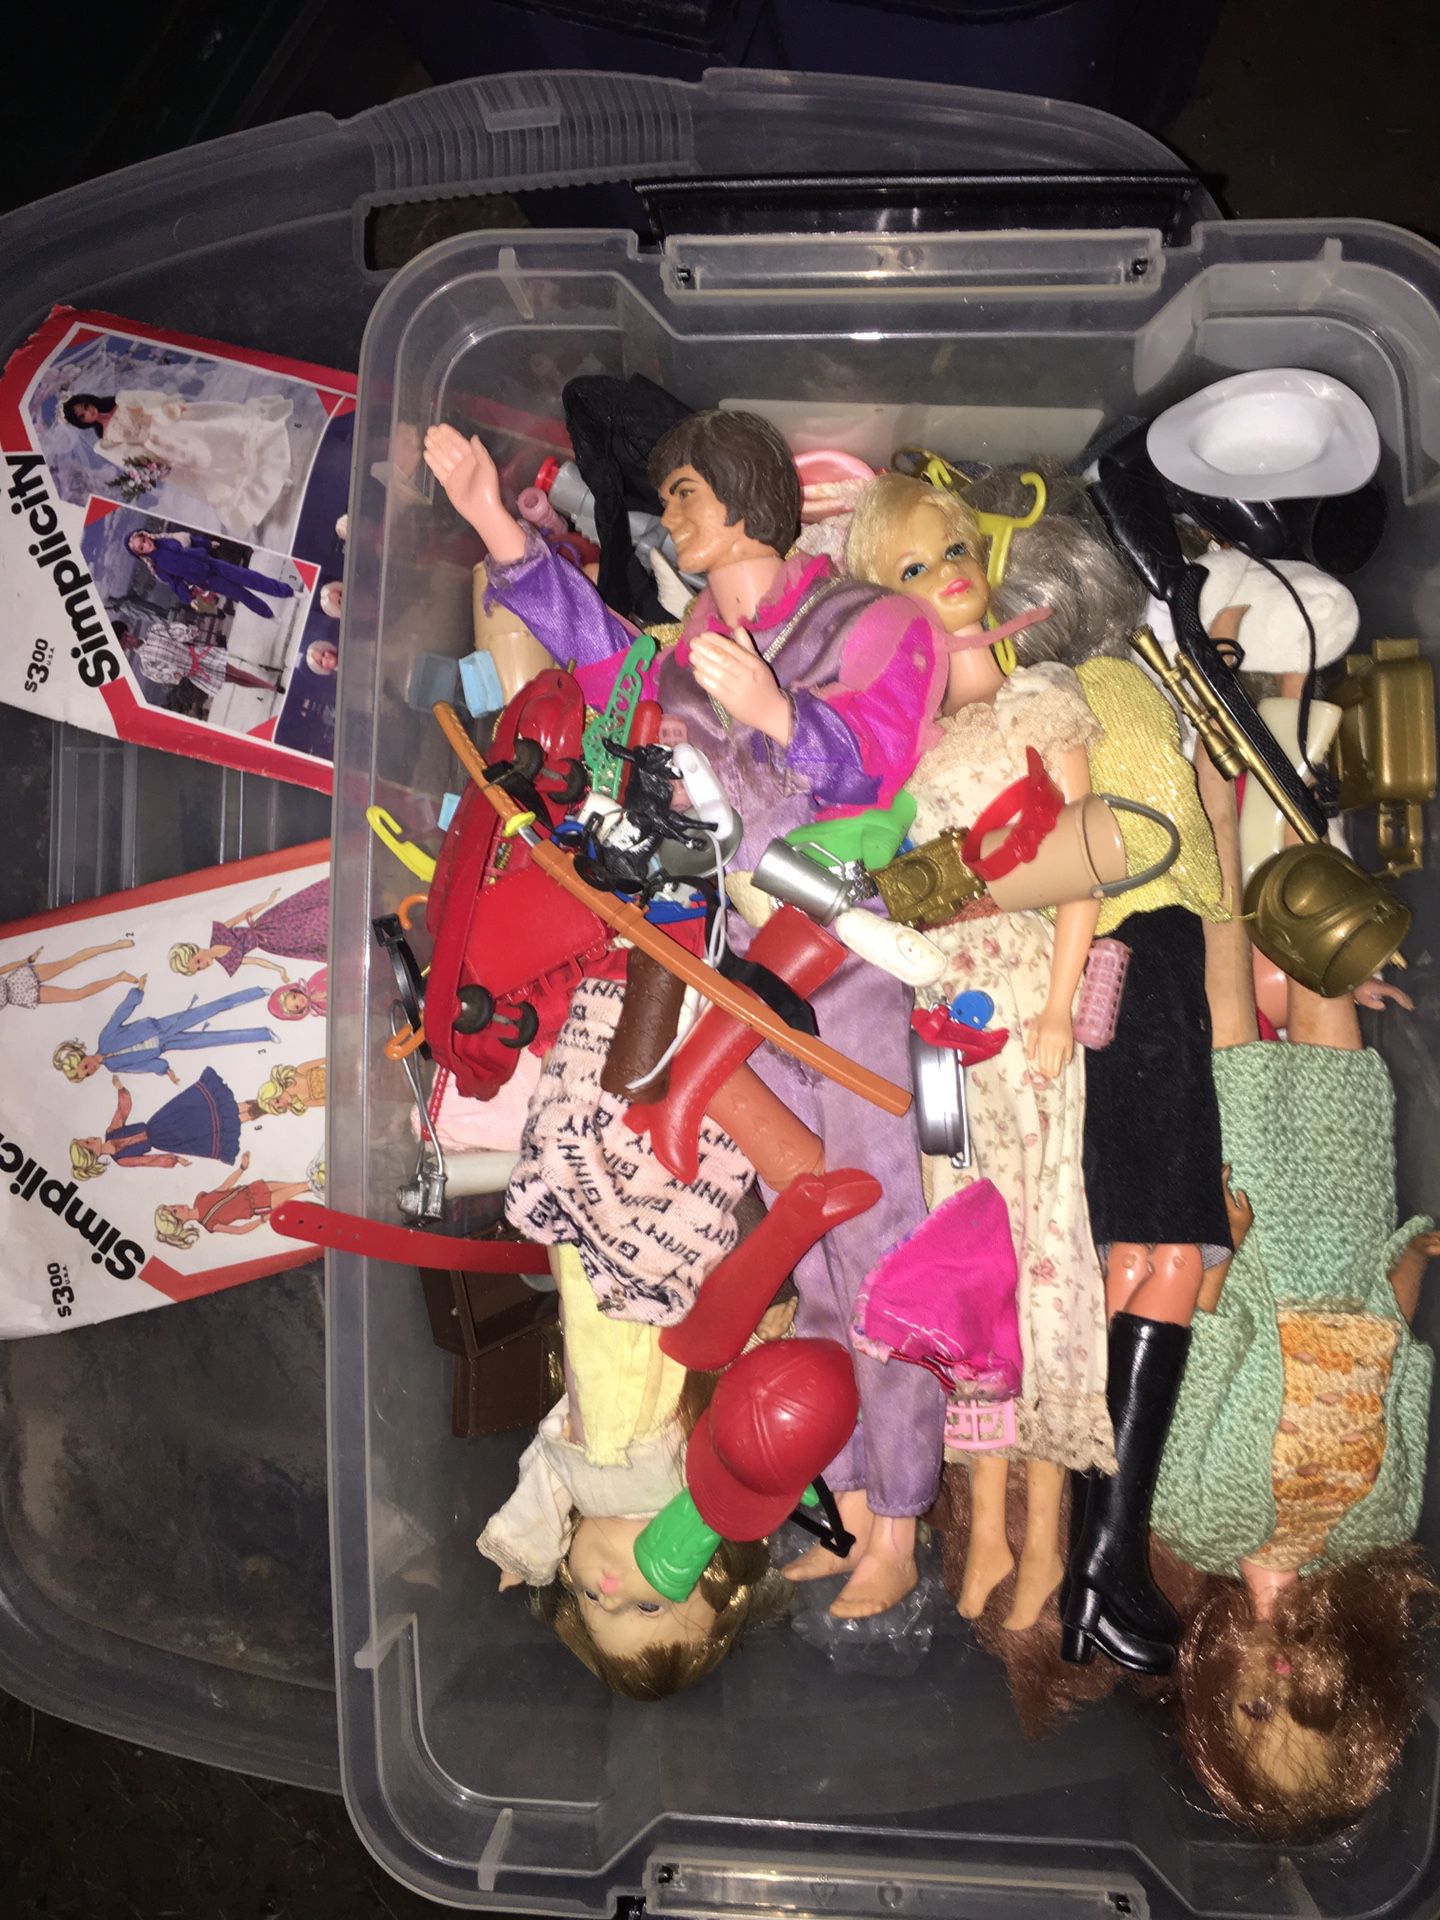 Vintage Barbie dolls and ken dolls with clothes and patterns everything goes for $60 firm